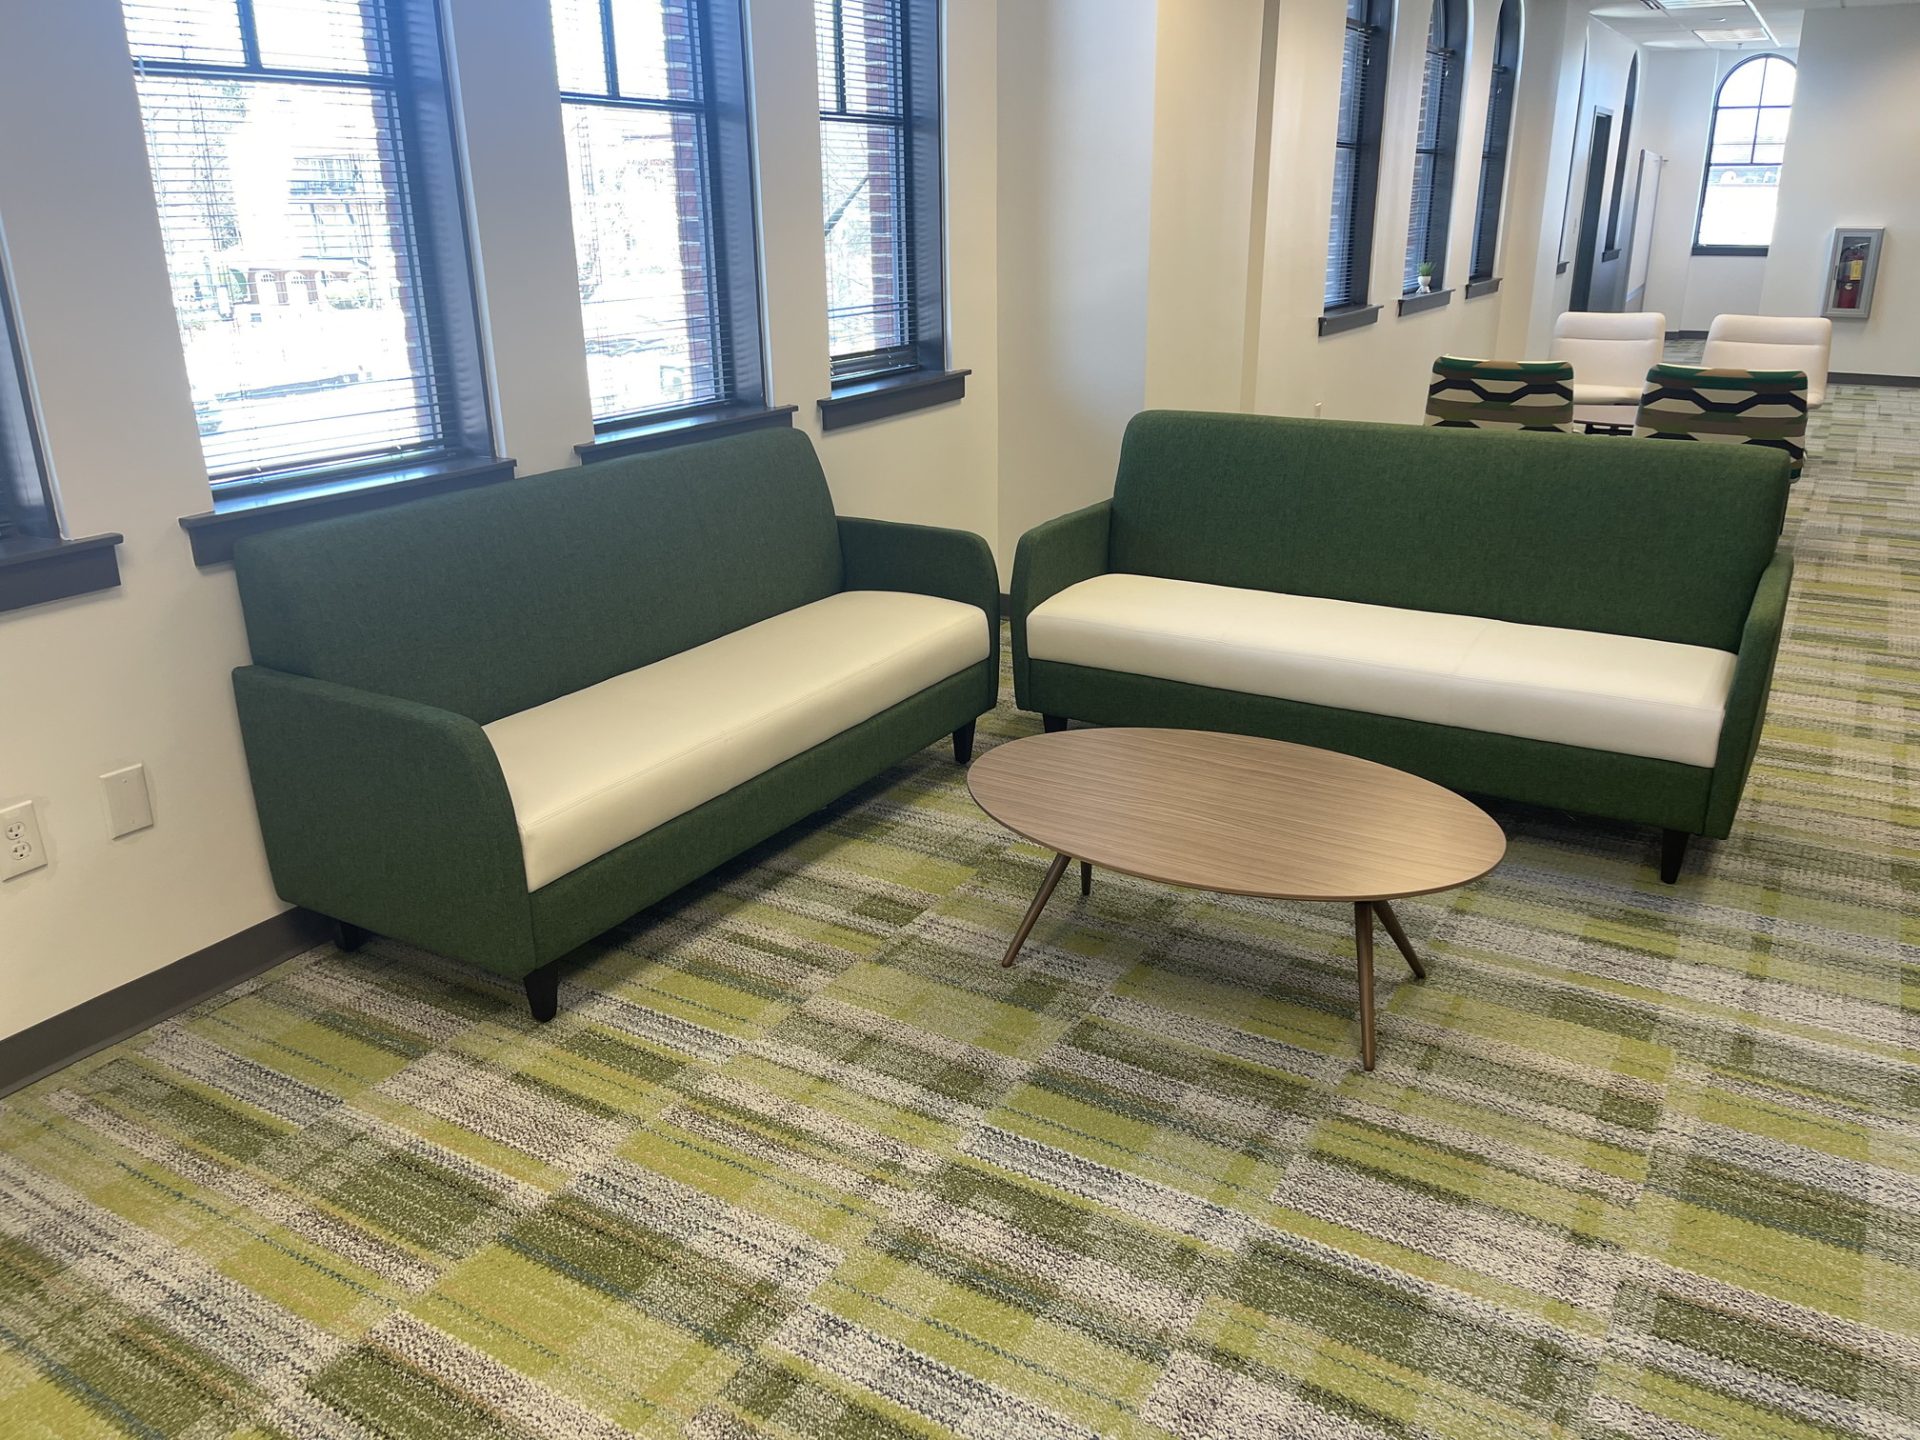 Green and white couches